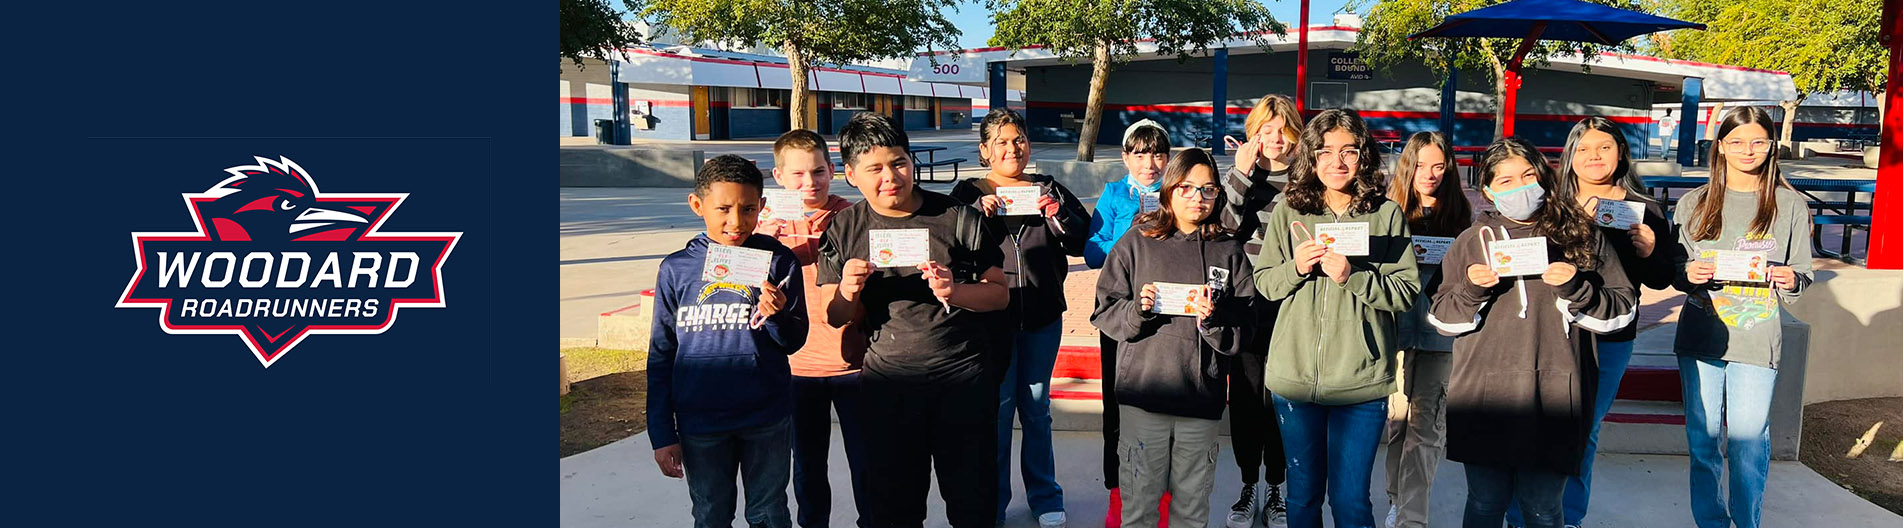 Woodard Roadrunners - group of students outside holding certificates